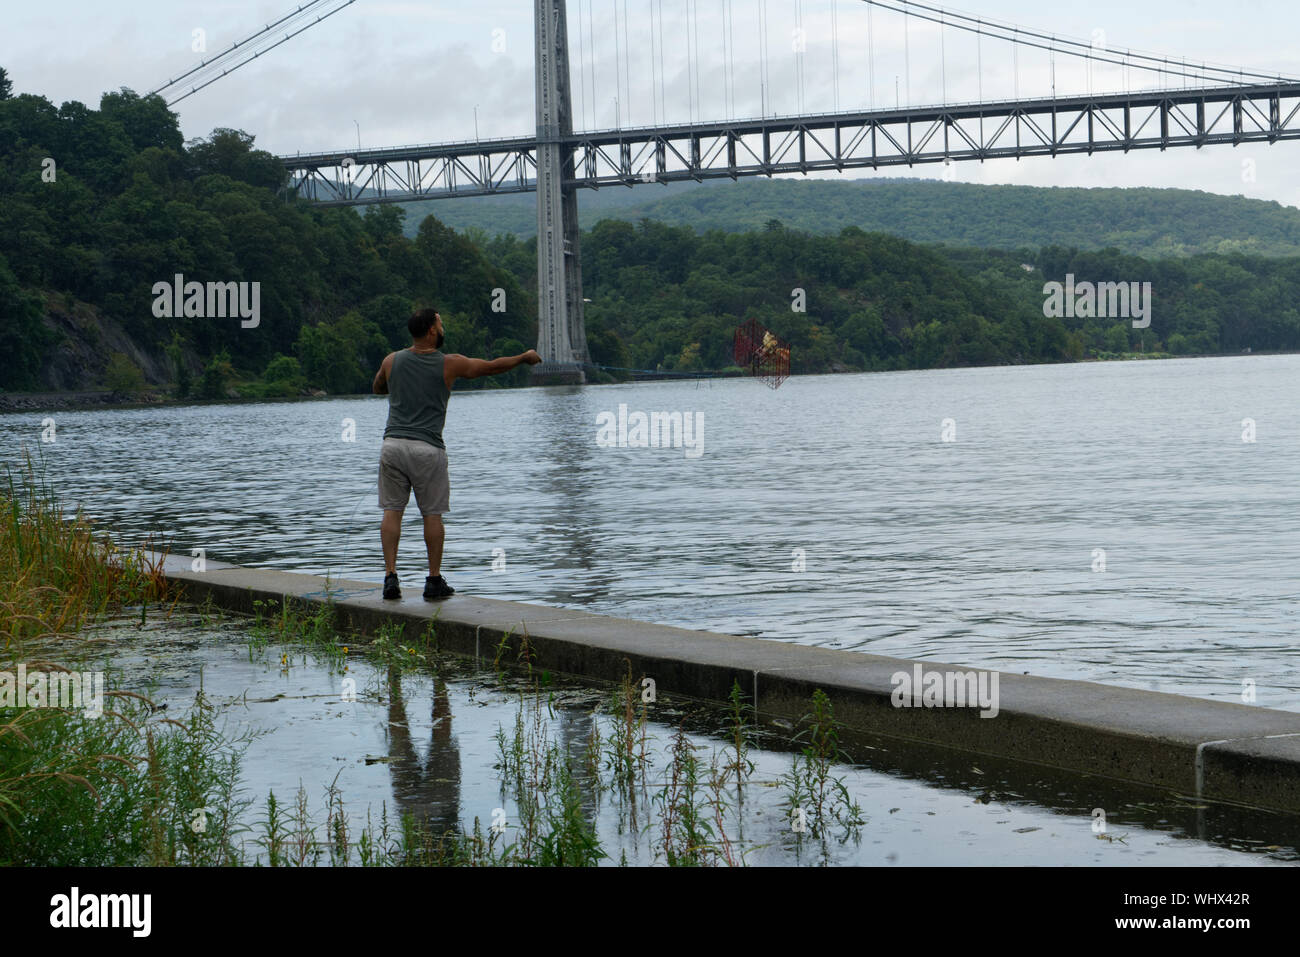 A fisherman uses a baited trap to fish for blue crabs in the Hudson River near the Bear Mountain Bridge. Sept. 2, 2019 Stock Photo